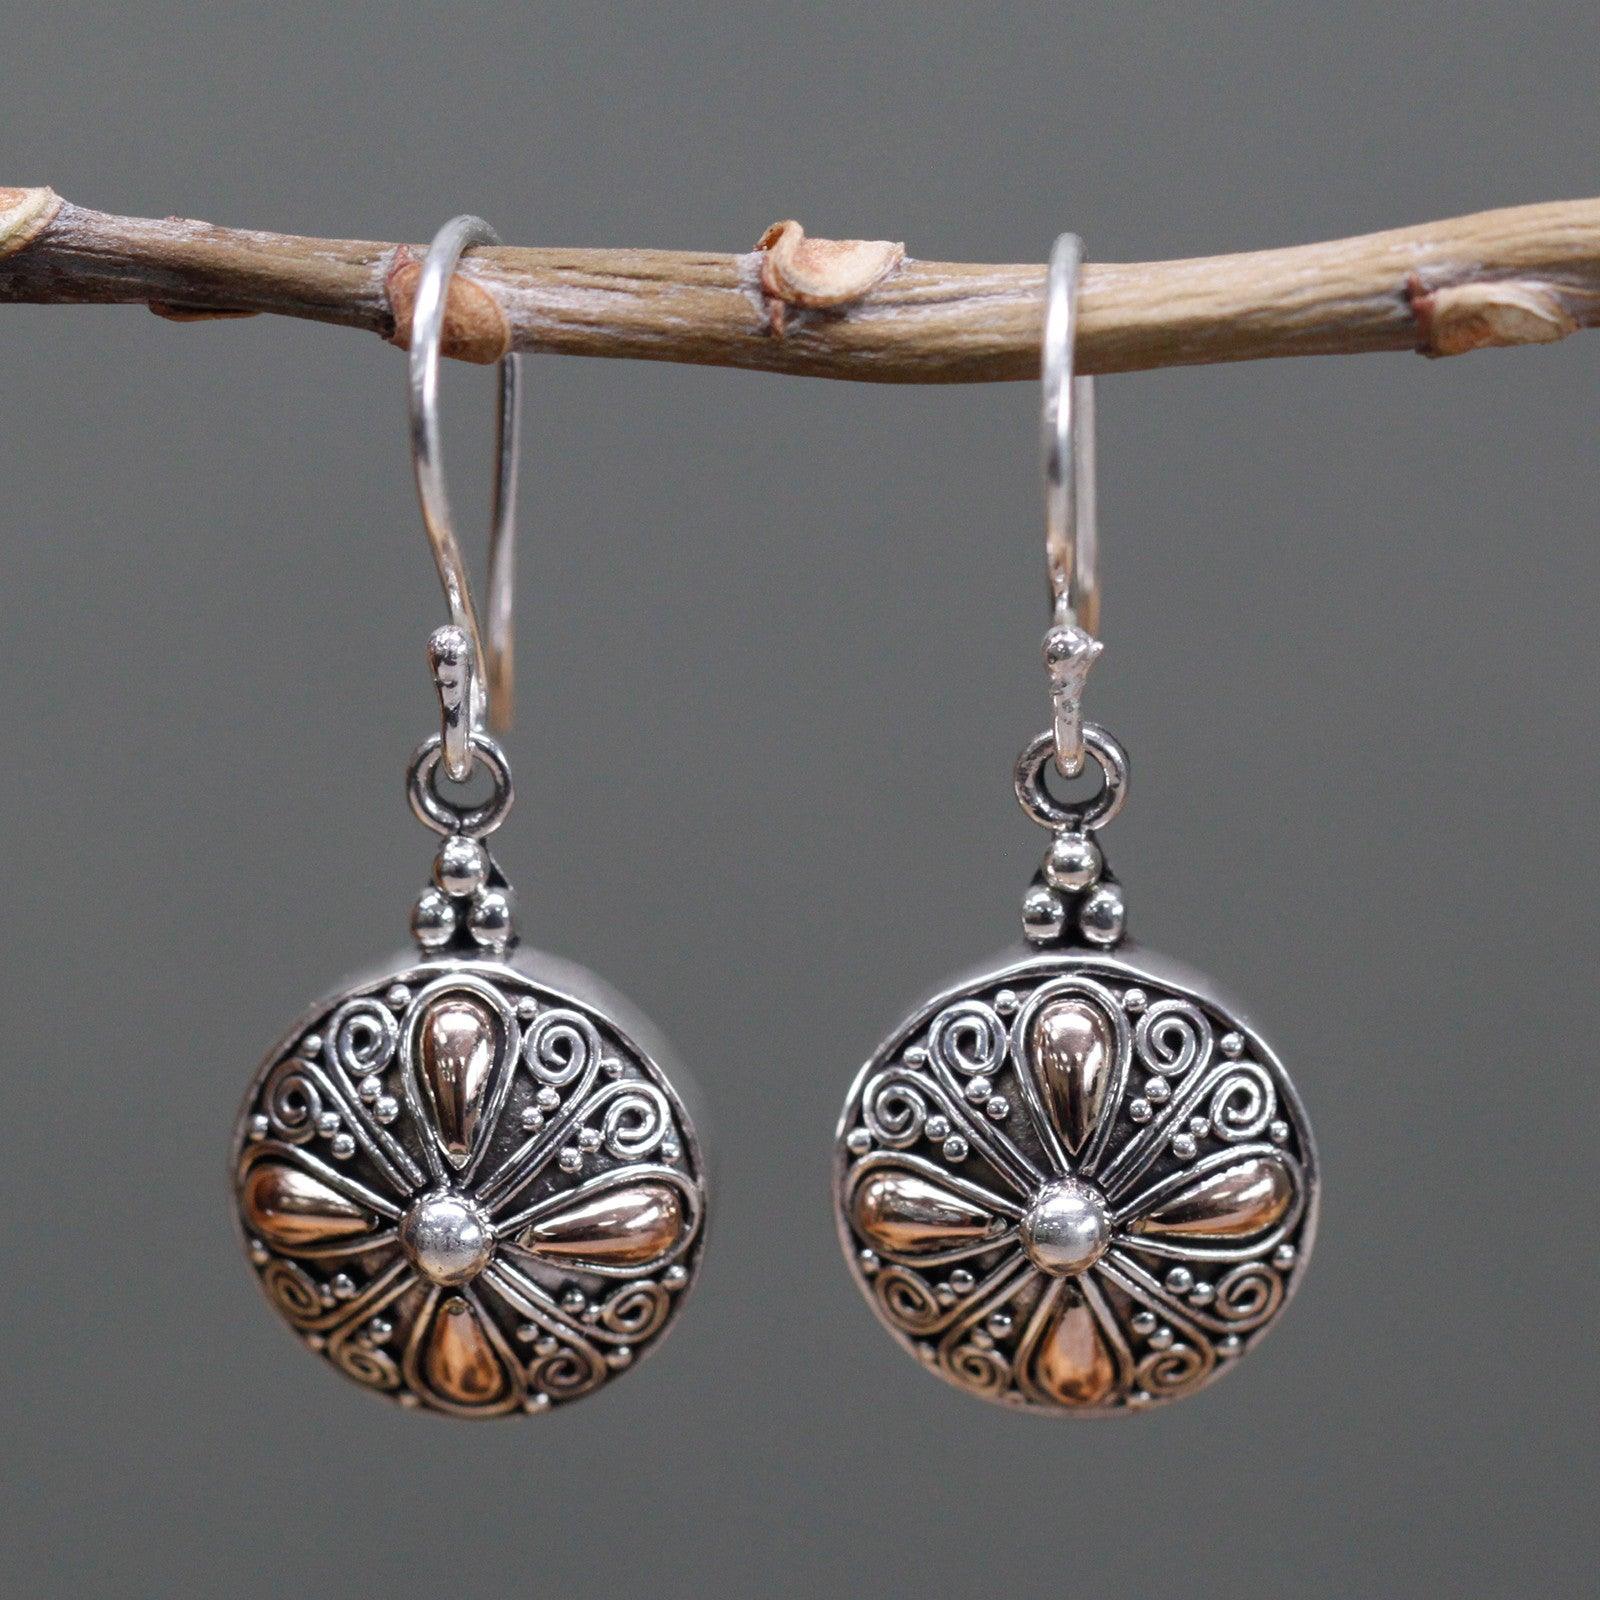 Handmade Bali Jewellery Silver & Gold Earring - Classic Round - DuvetDay.co.uk